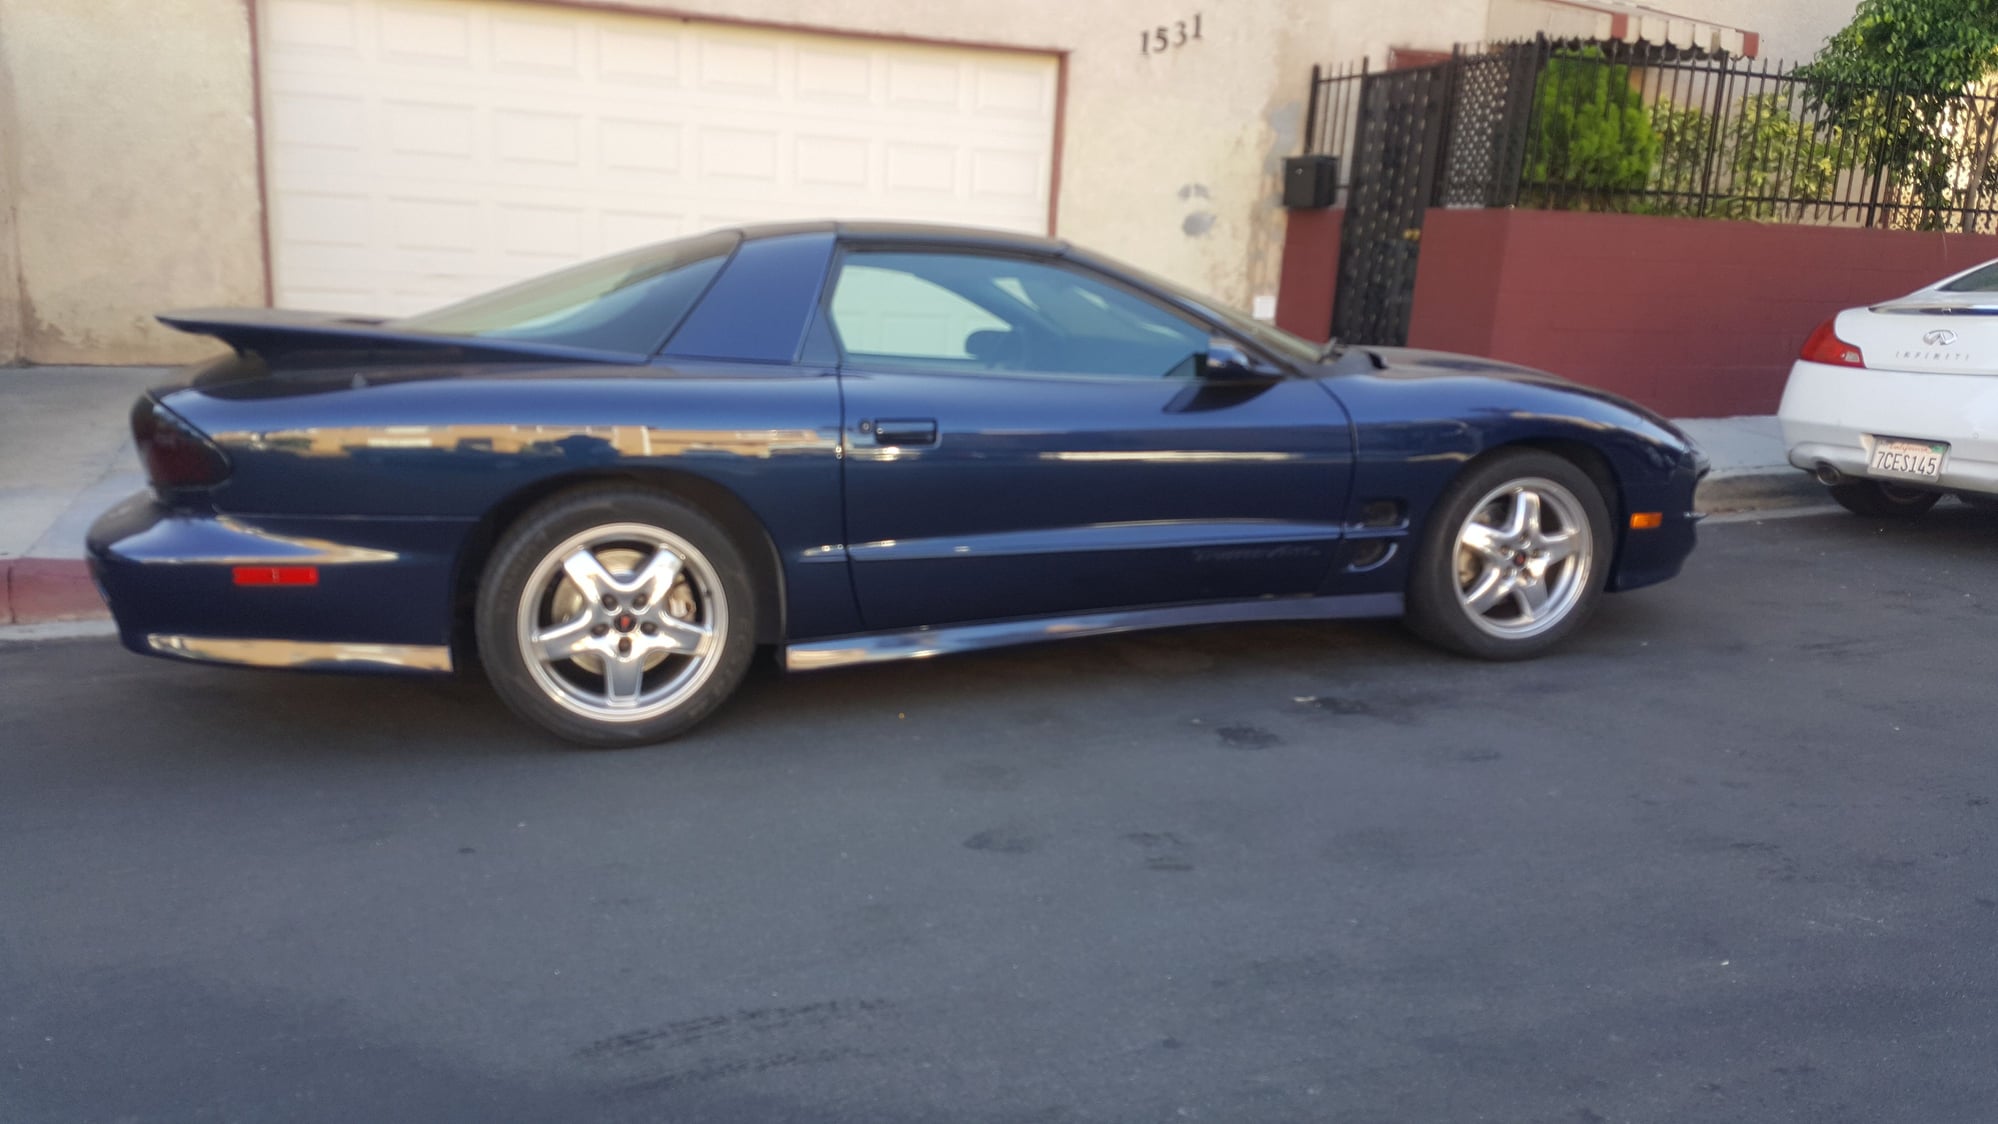 2002 Pontiac Firebird - 2002 ws- 2nd owner - Used - VIN 2G2FV22GX22162824 - 47,000 Miles - 8 cyl - 2WD - Manual - Coupe - Blue - Los Angeles, CA 90028, United States